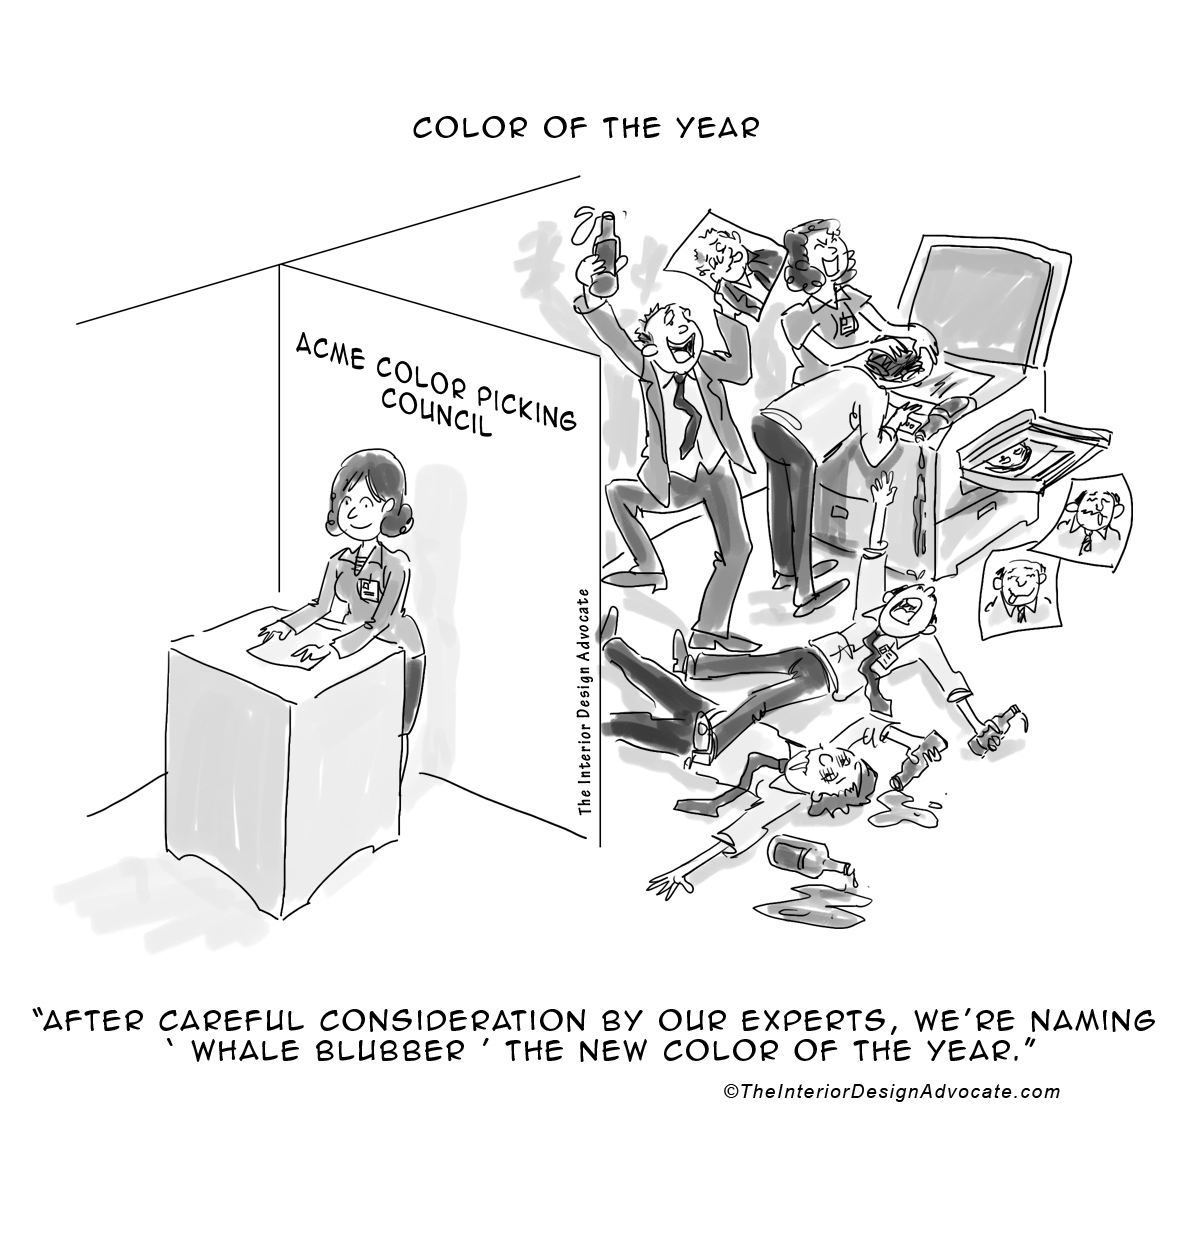 Design Giggles: Color Of The Year